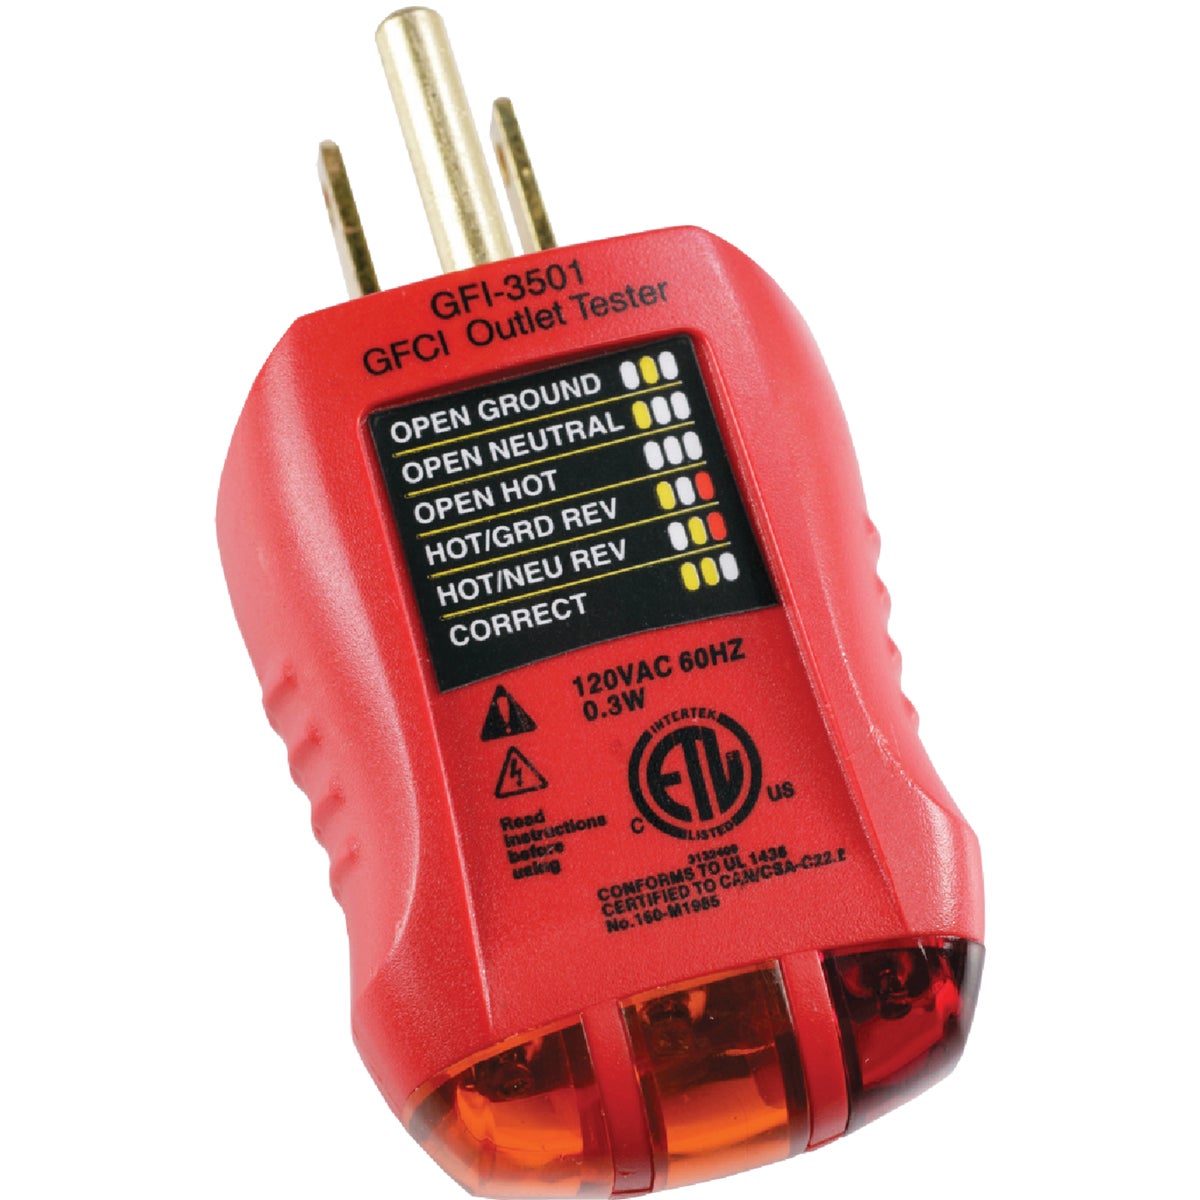 Item 503959, Ground fault receptacle tester and circuit analyzer.